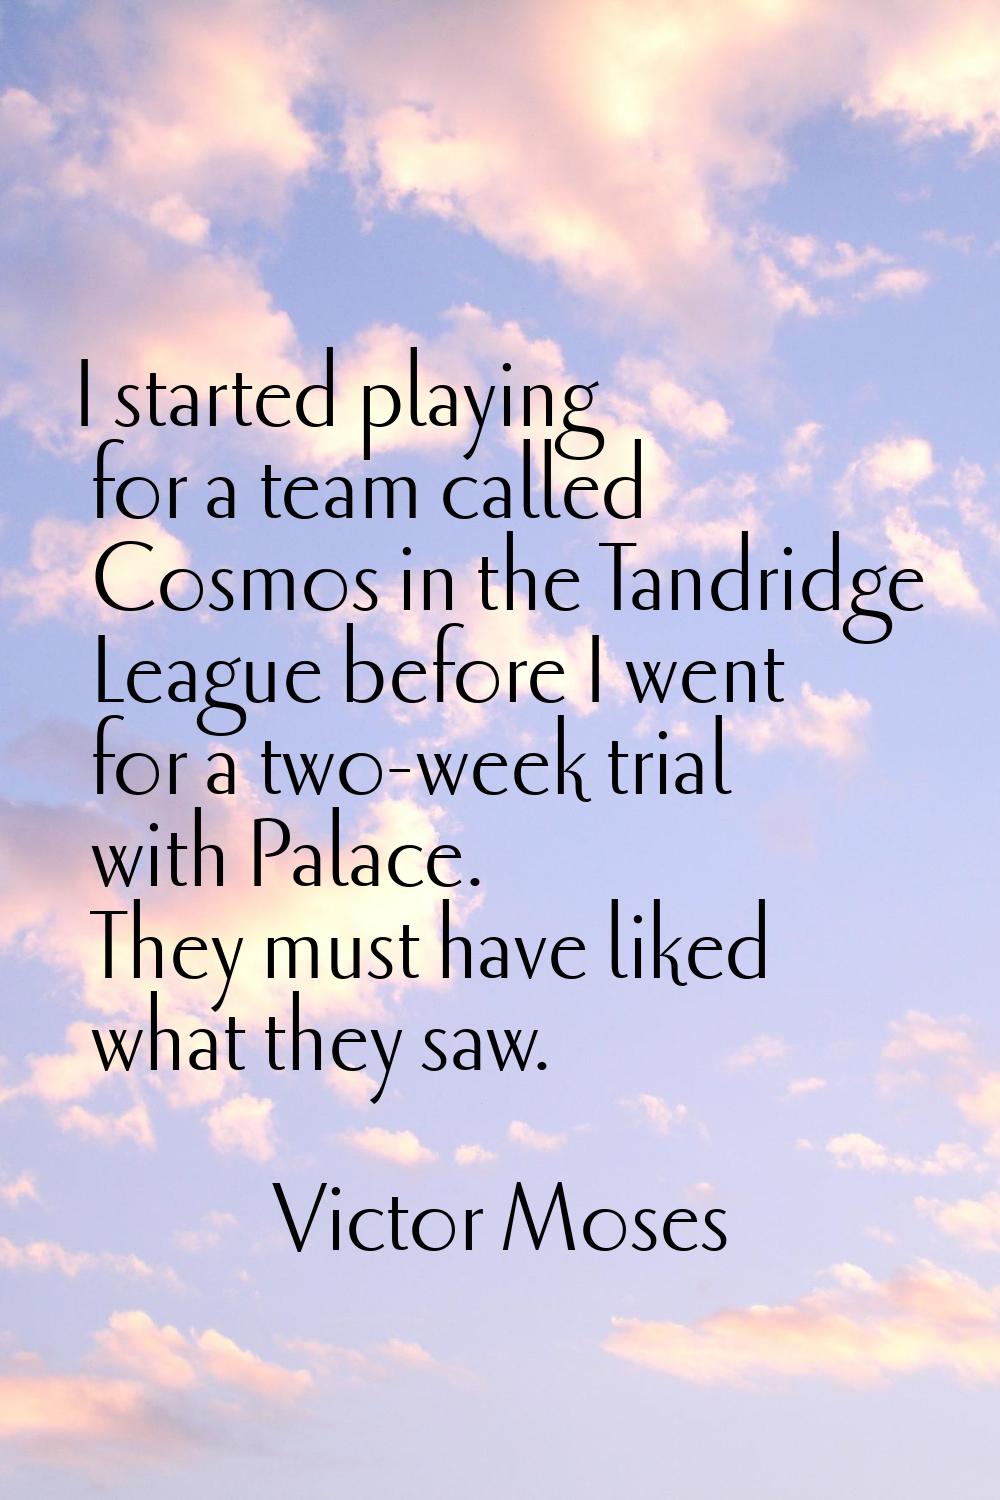 I started playing for a team called Cosmos in the Tandridge League before I went for a two-week tri